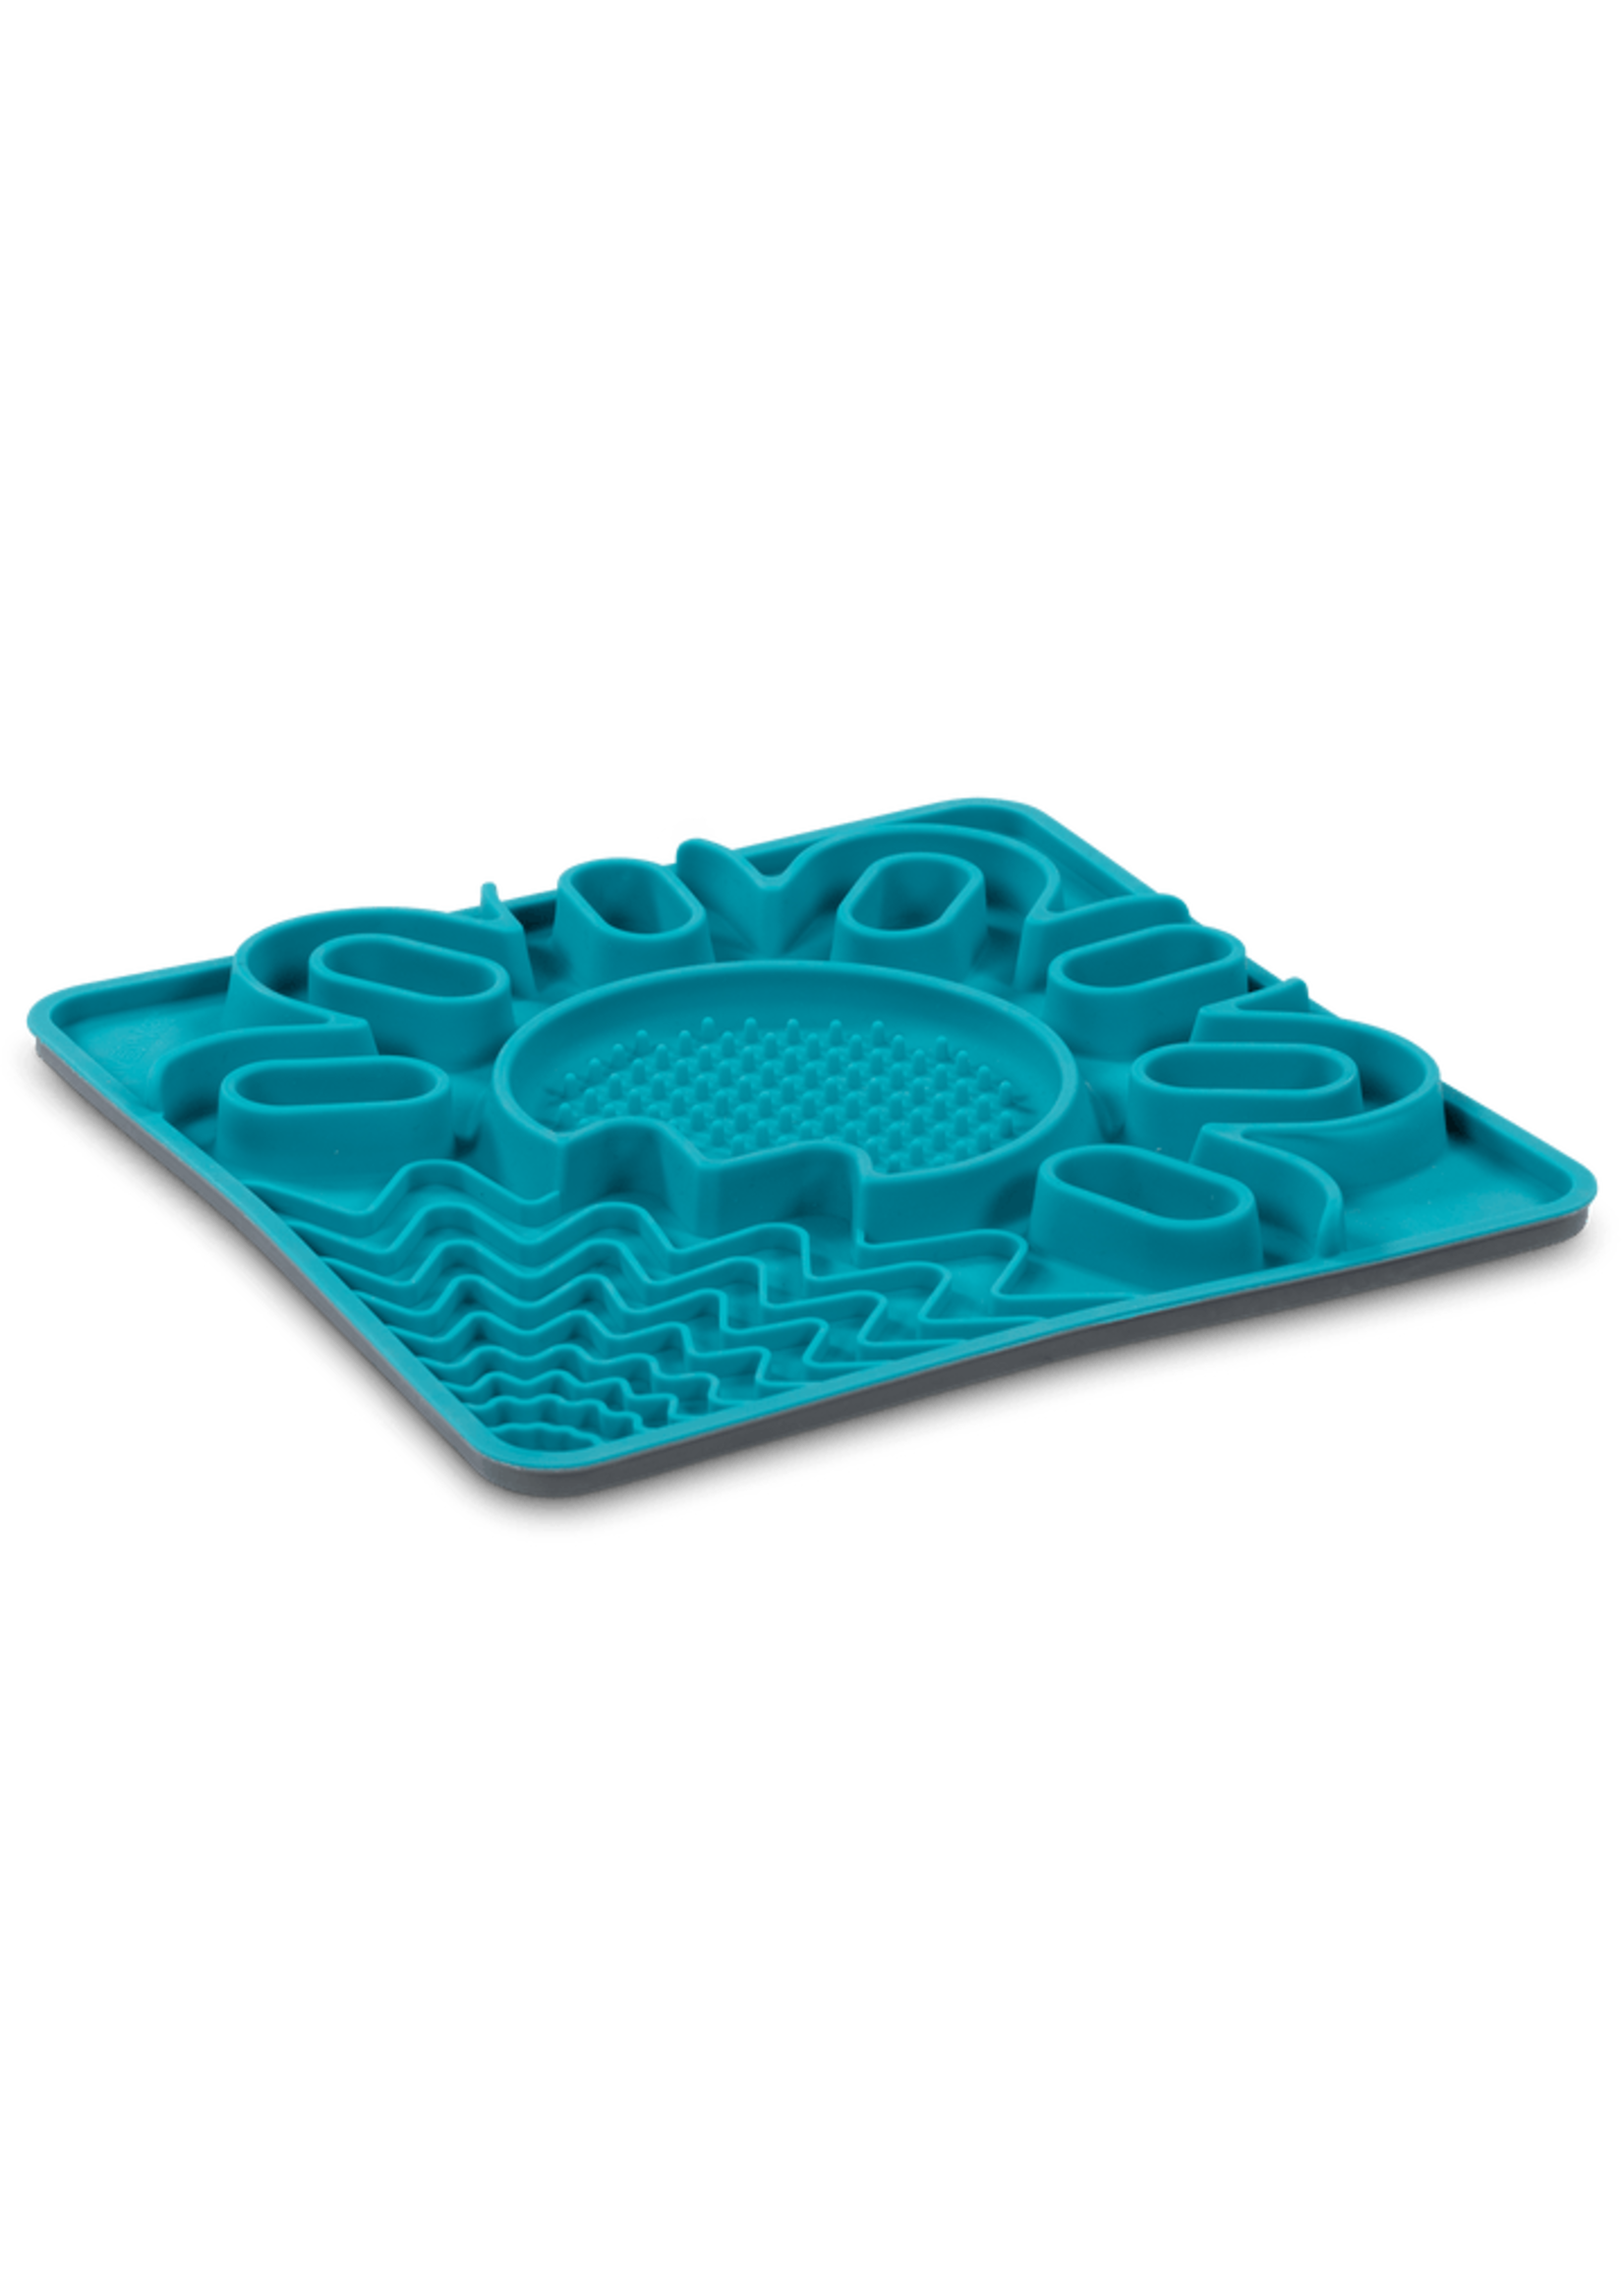 Messy Mutts Messy Mutts Framed Silicone Interactive Licking Bowl Mat